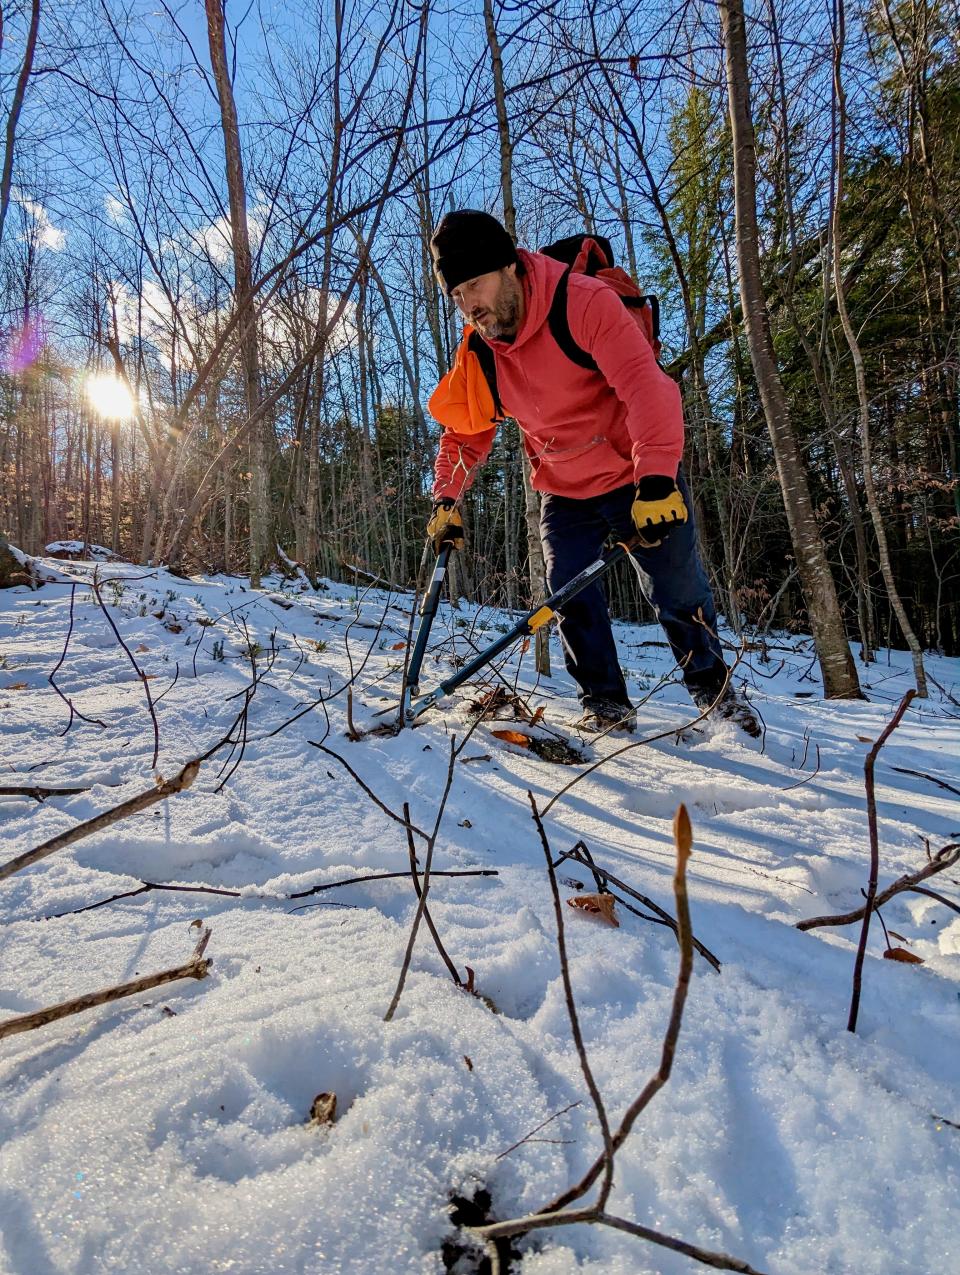 Western Mass Backcountry Alliance founder Andy Mathey works to create another backcountry skiing zone.